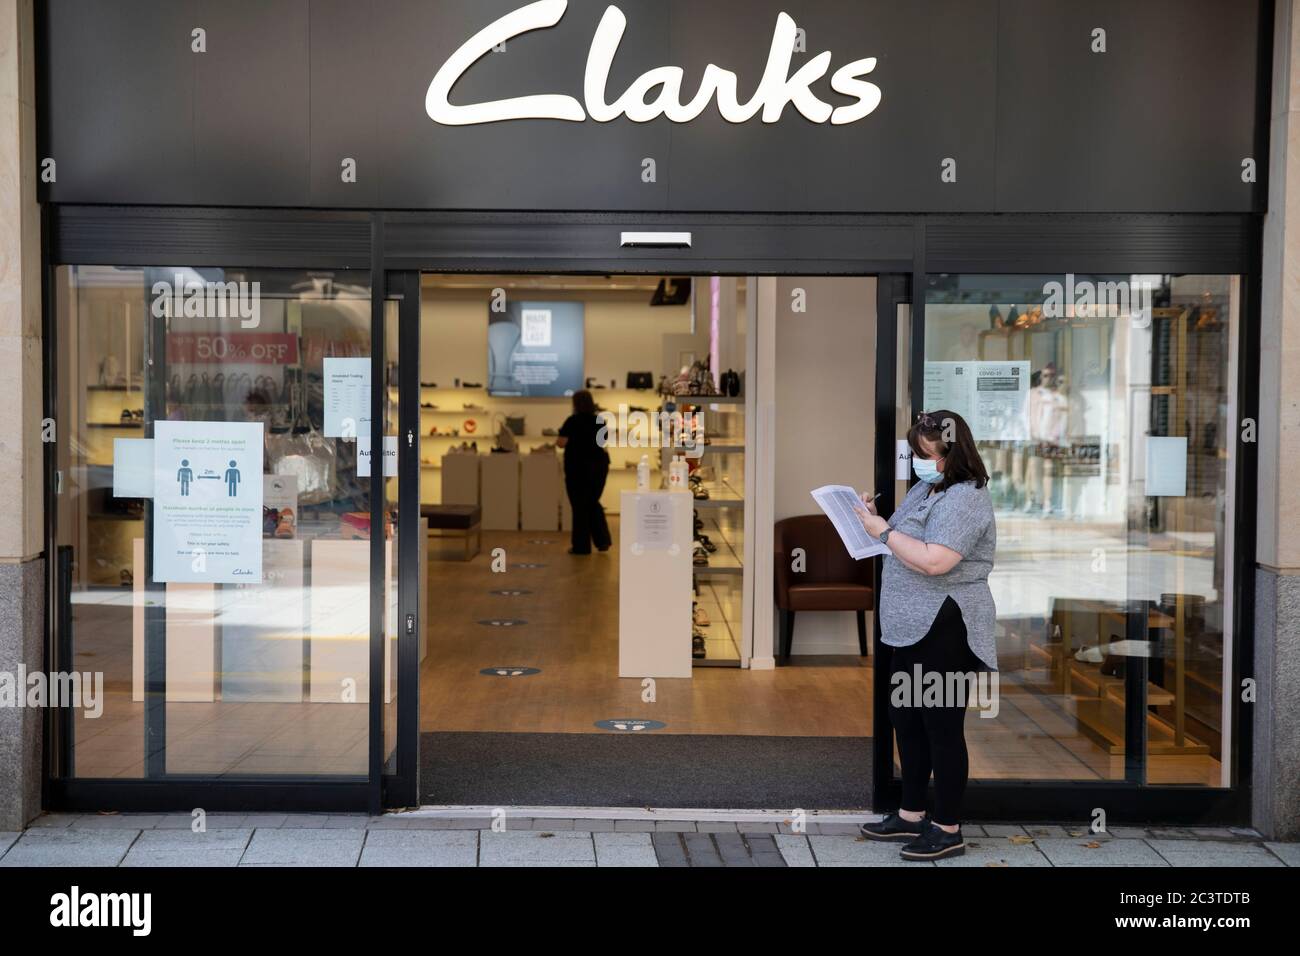 Cardiff, UK. 22nd June, 2020. A of staff wearing PPE outside a store as some non-essential shops reopen in Cardiff city centre following the lockdown. Credit: Mark Hawkins/Alamy